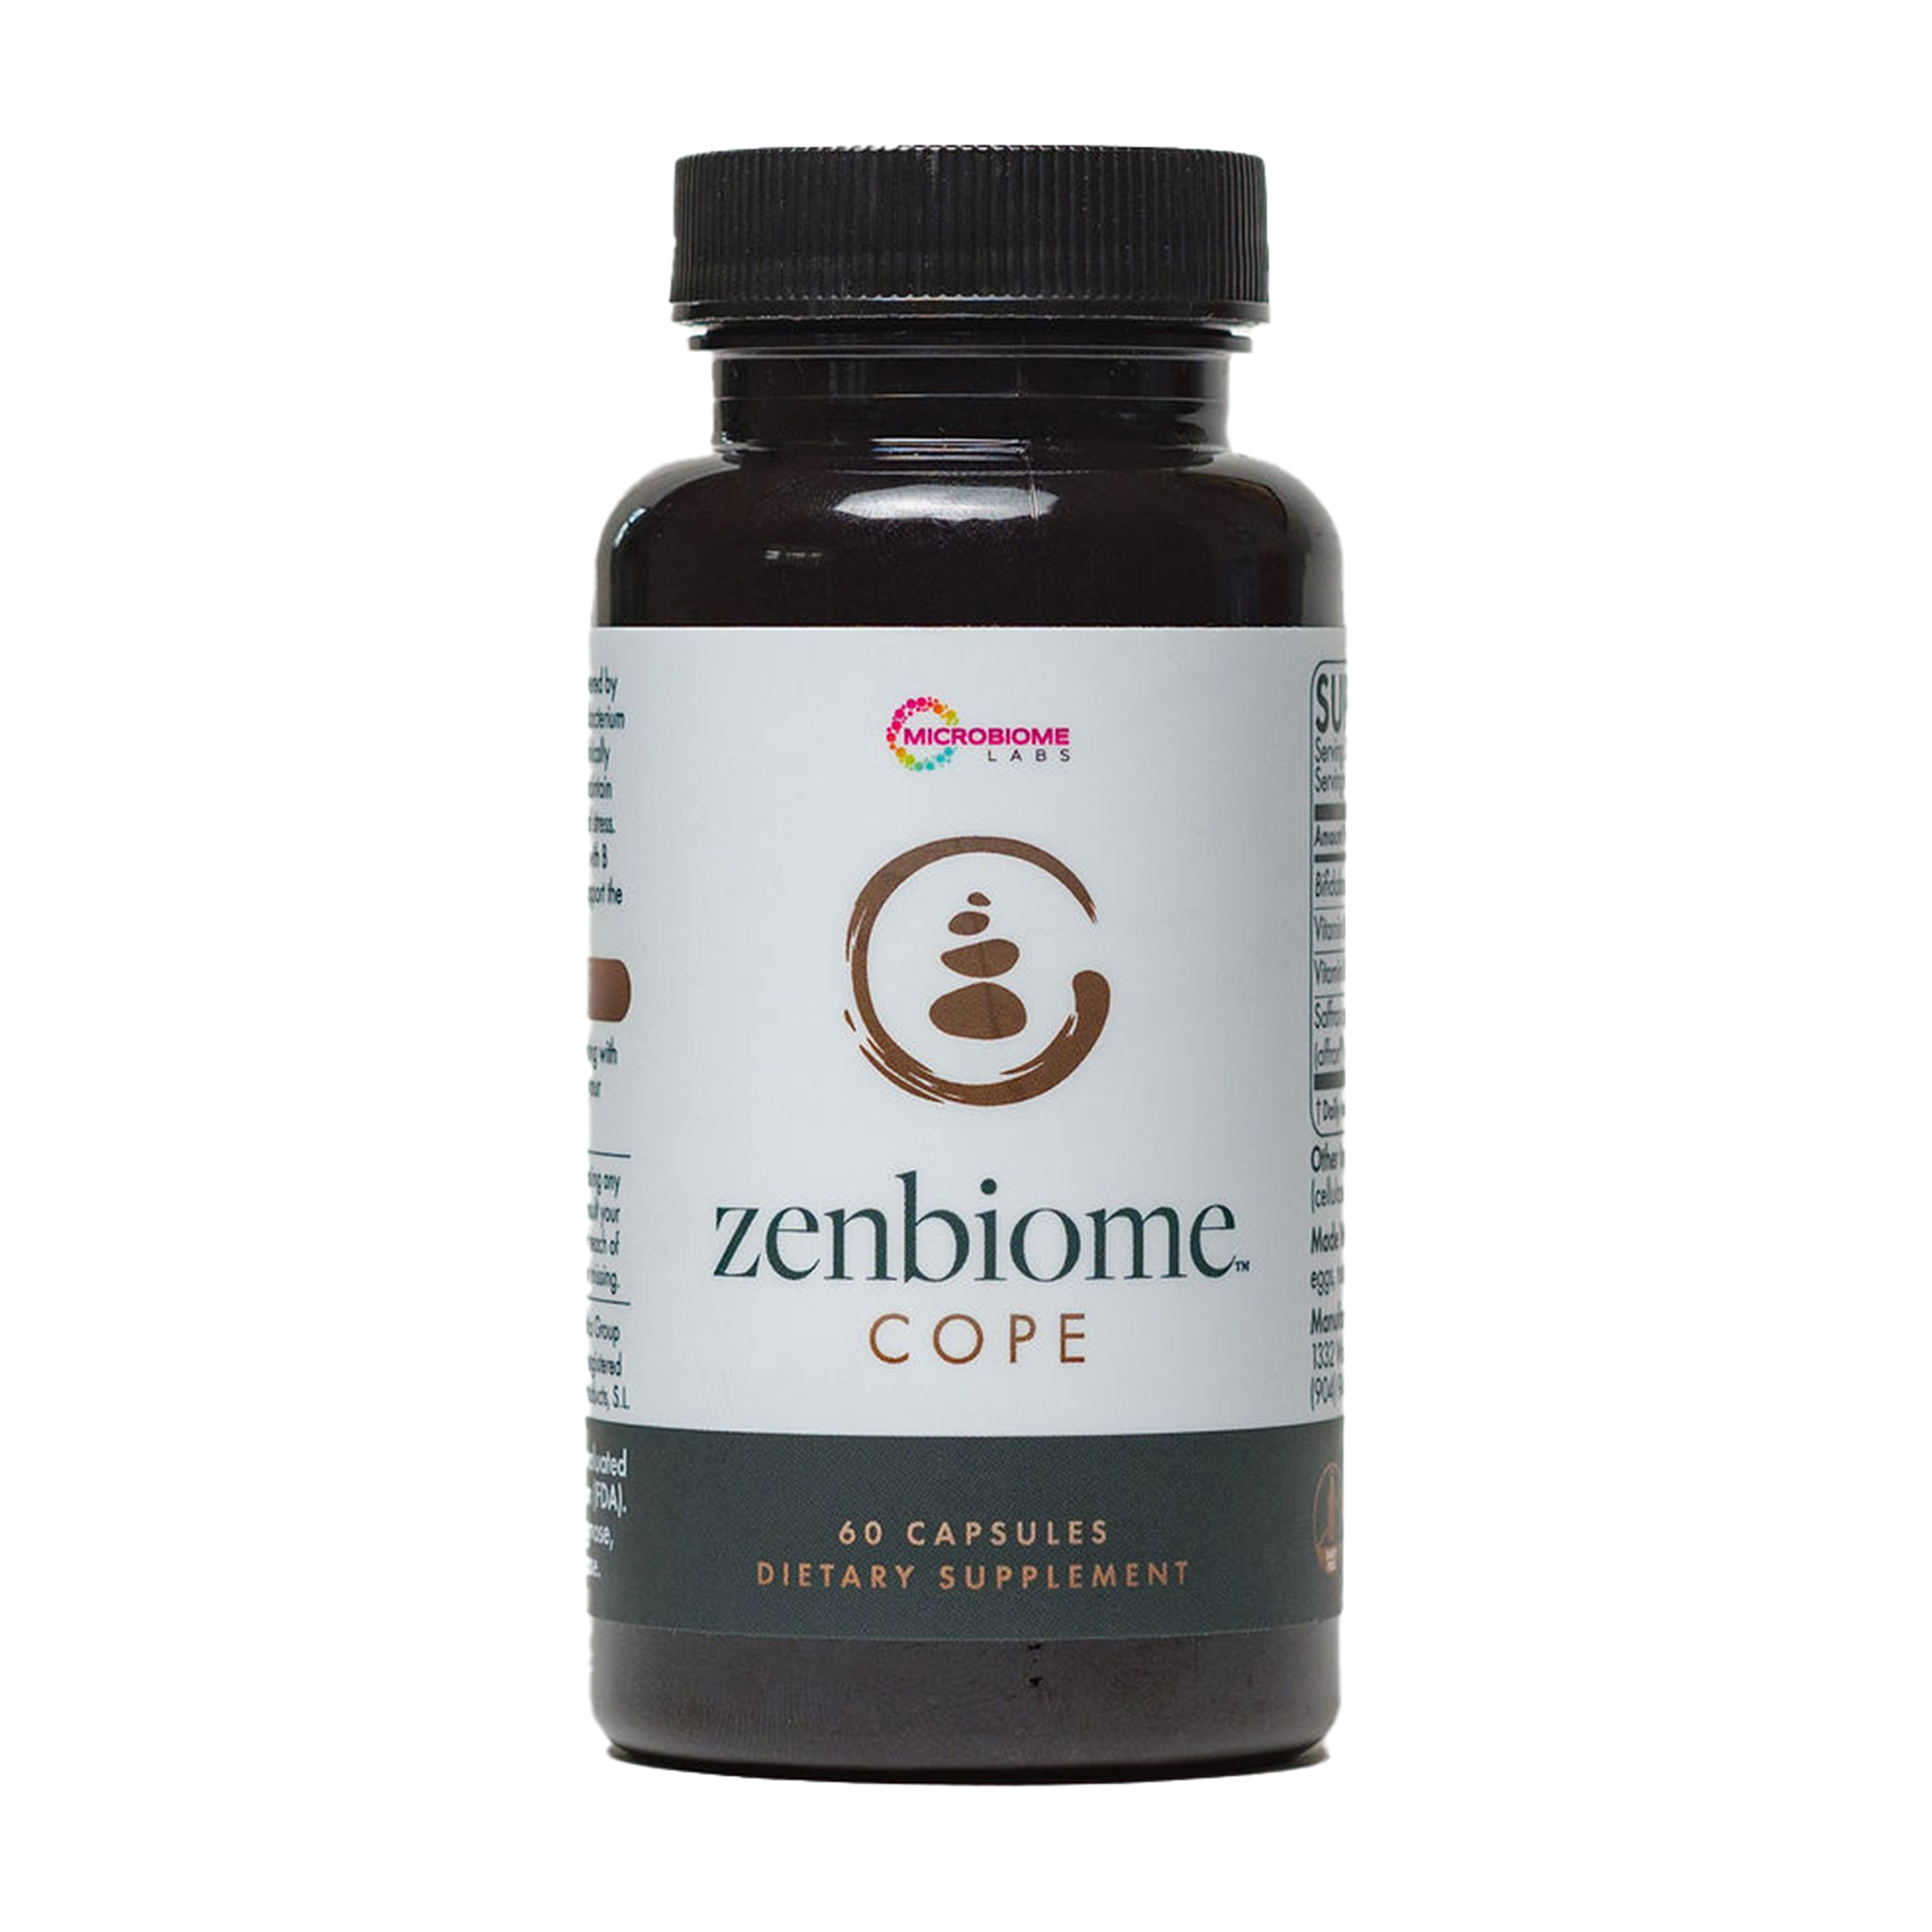 ZenBiome Cope (Specific strain for anxiety & sensory integration)